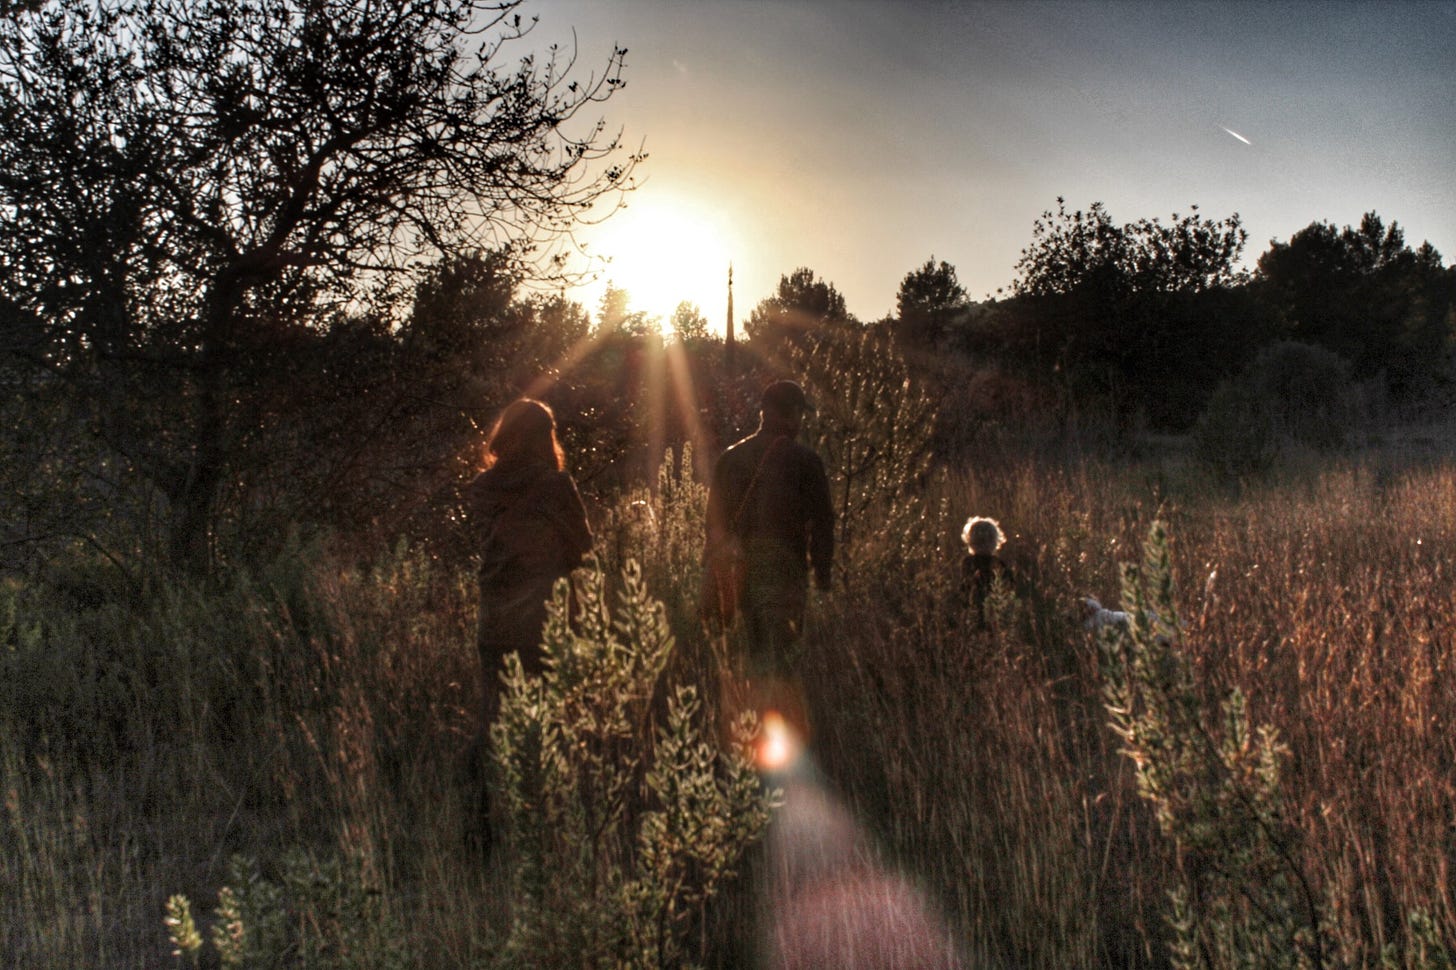 The silhoutte of a family walking through tall grass at sunset.